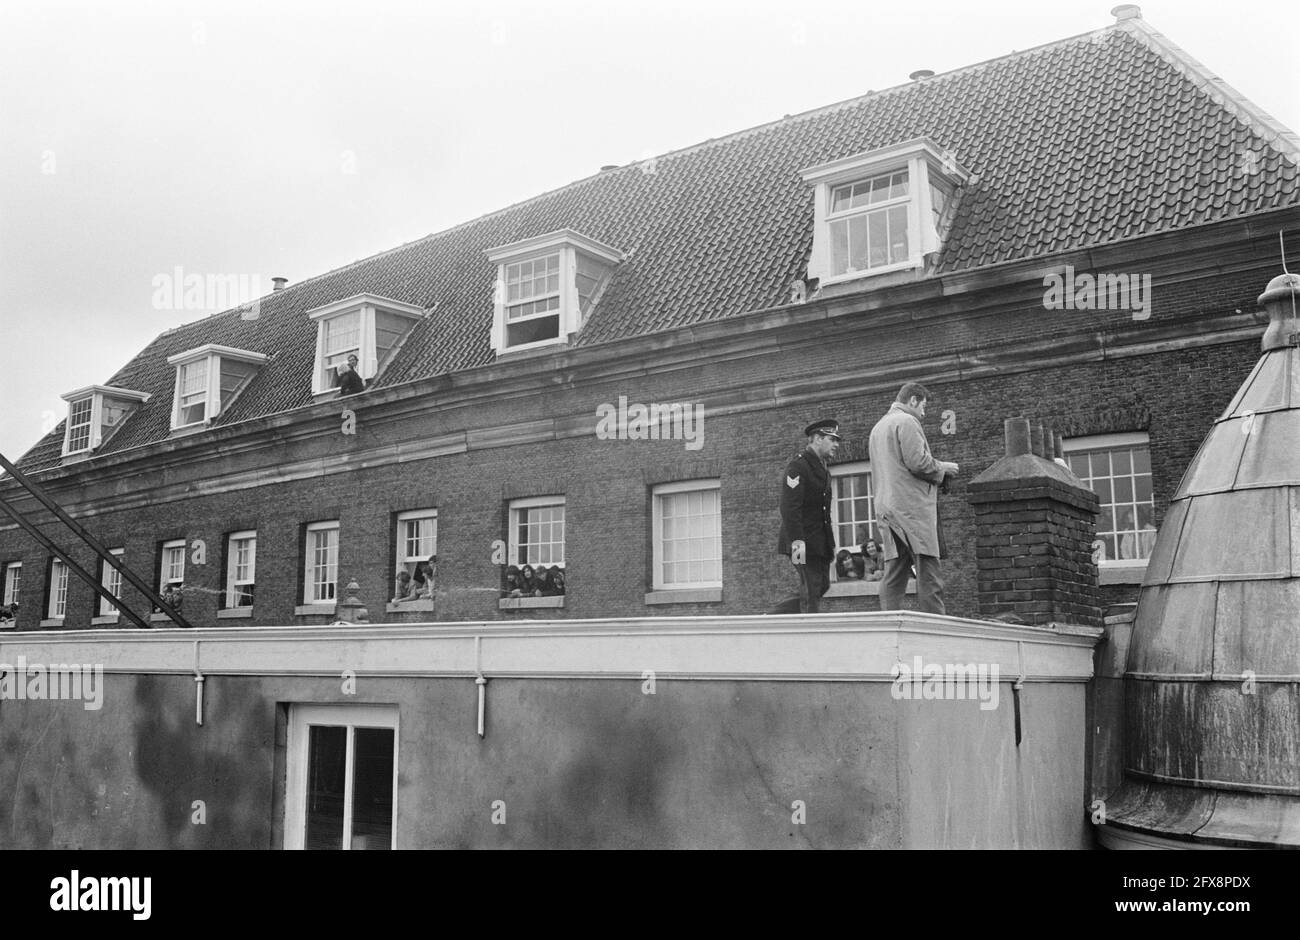 Occupation Maagdenhuis Amsterdam, by students police on roof Maagdenhuis, from windows look occupiers, may 20, 1969, POLICE, occupations, students, The Netherlands, 20th century press agency photo, news to remember, documentary, historic photography 1945-1990, visual stories, human history of the Twentieth Century, capturing moments in time Stock Photo